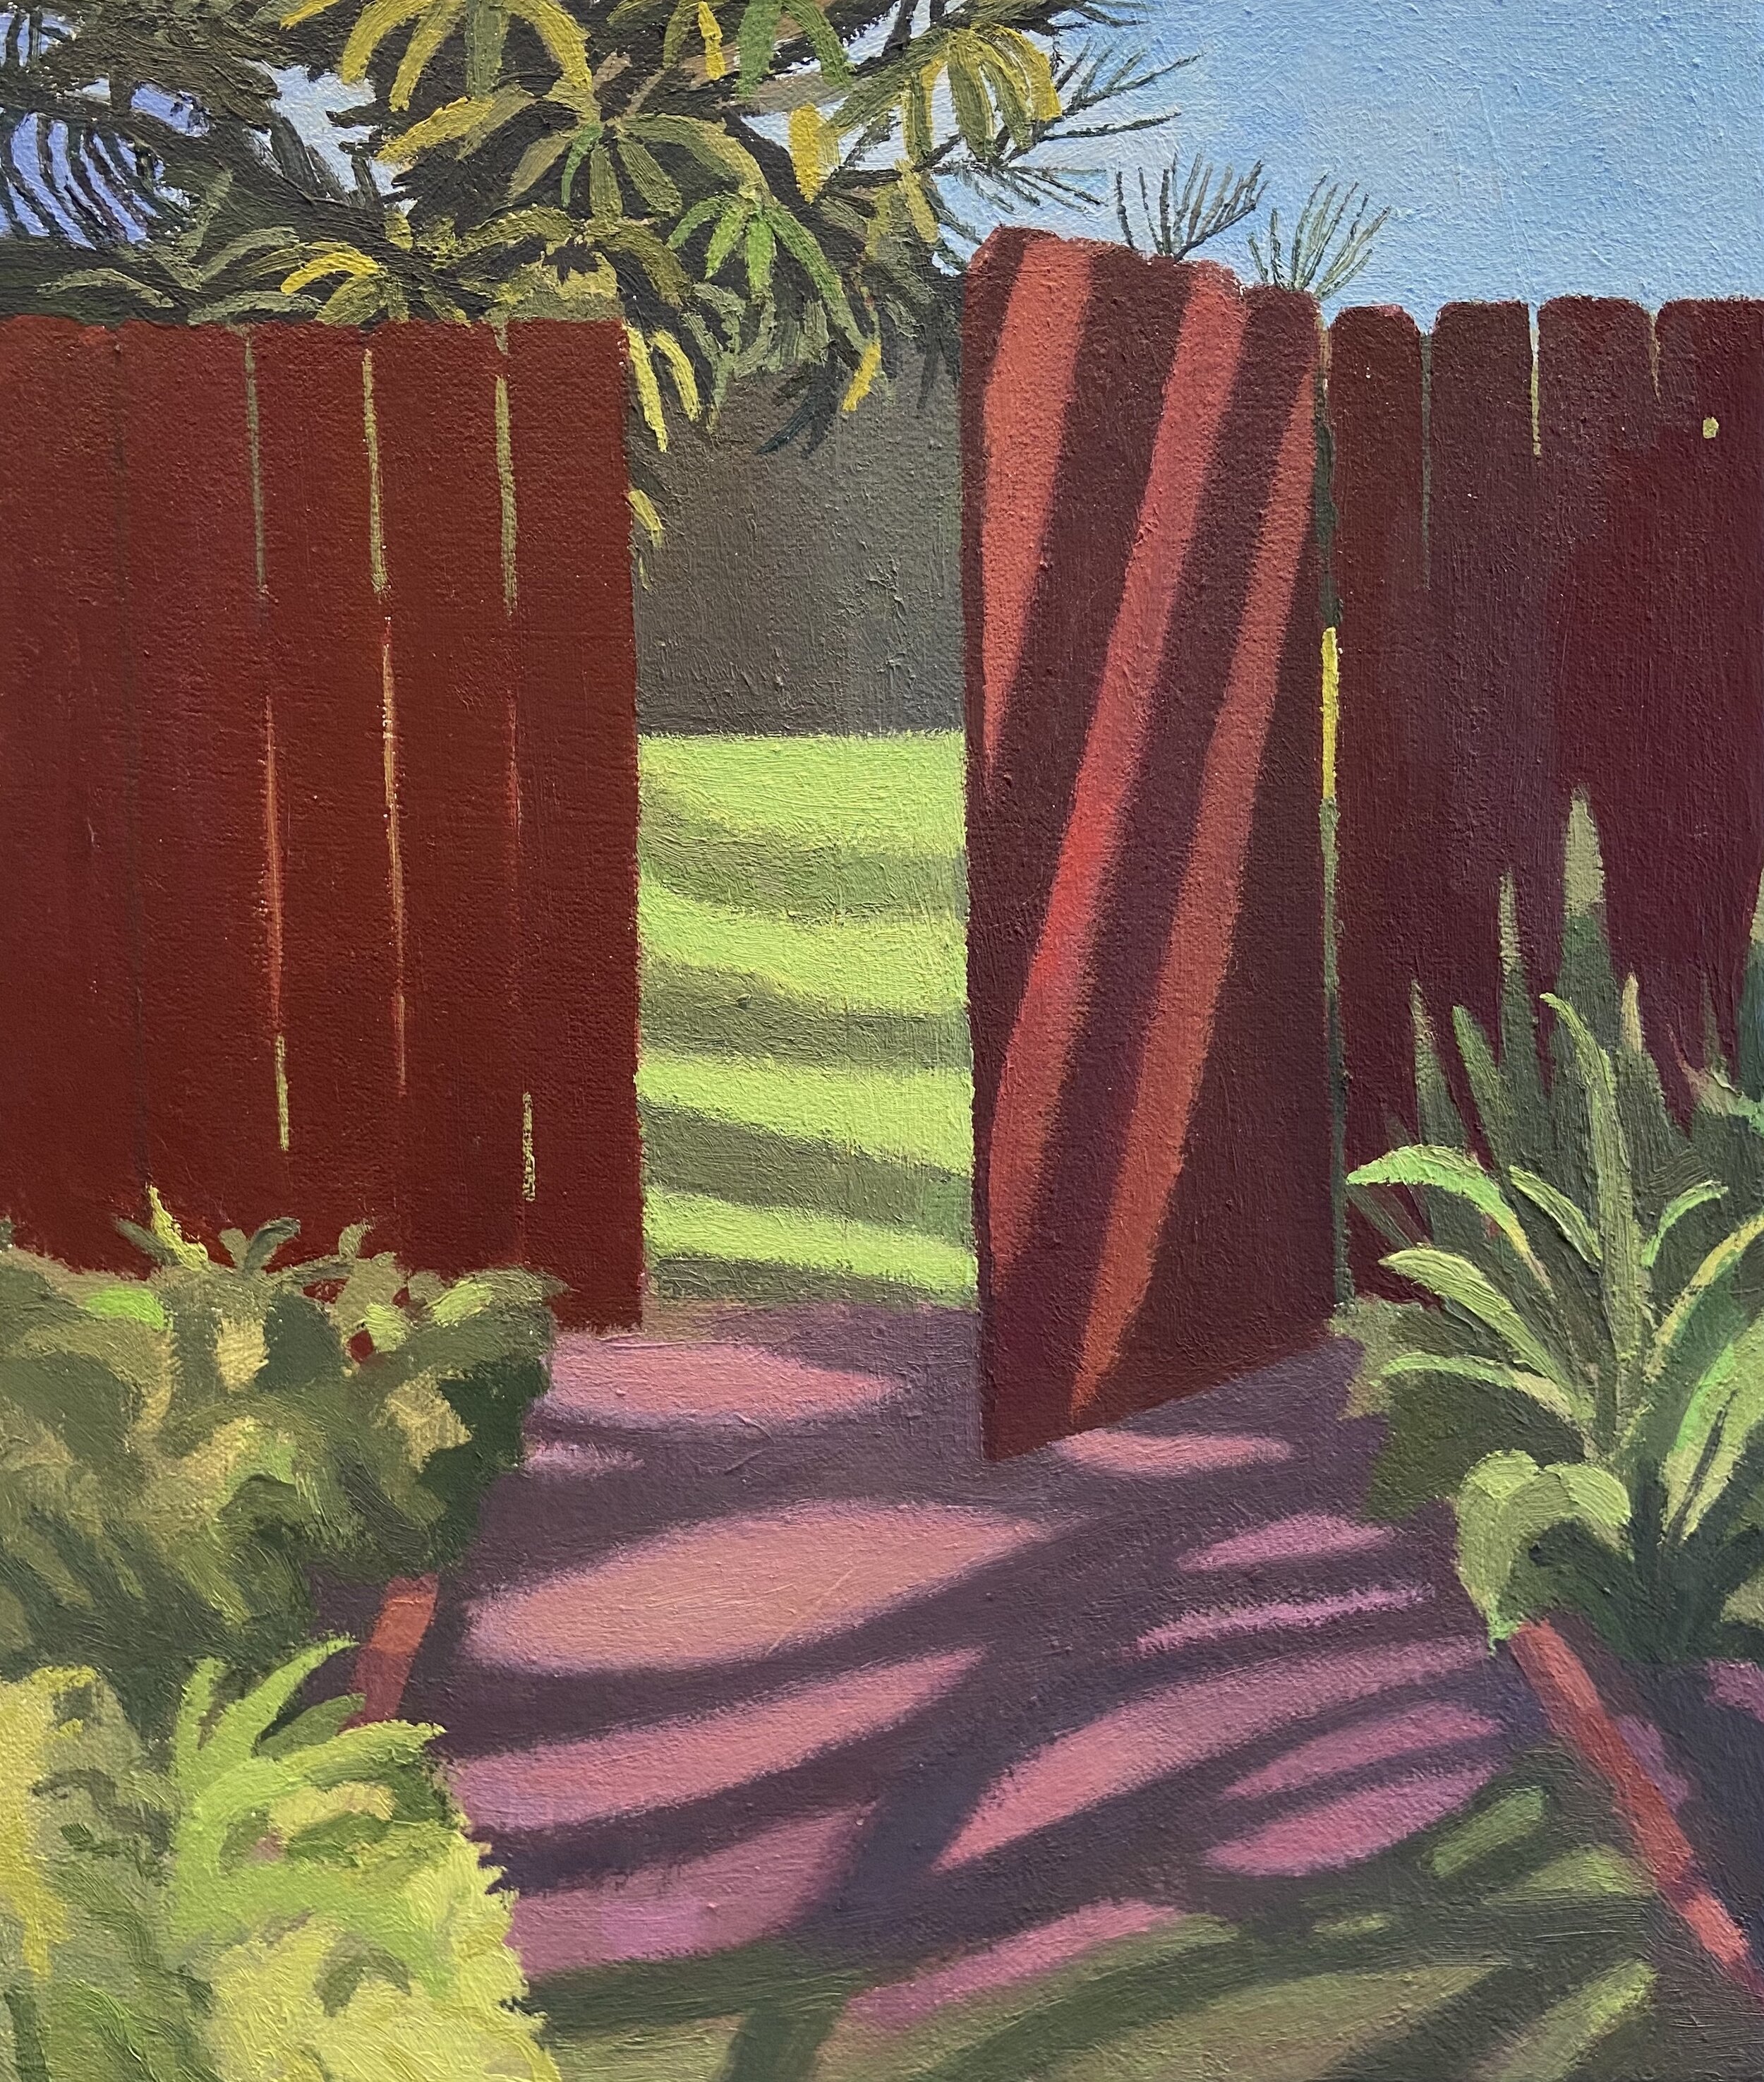  13 x 11 inches, Oil on Canvas, 2020 